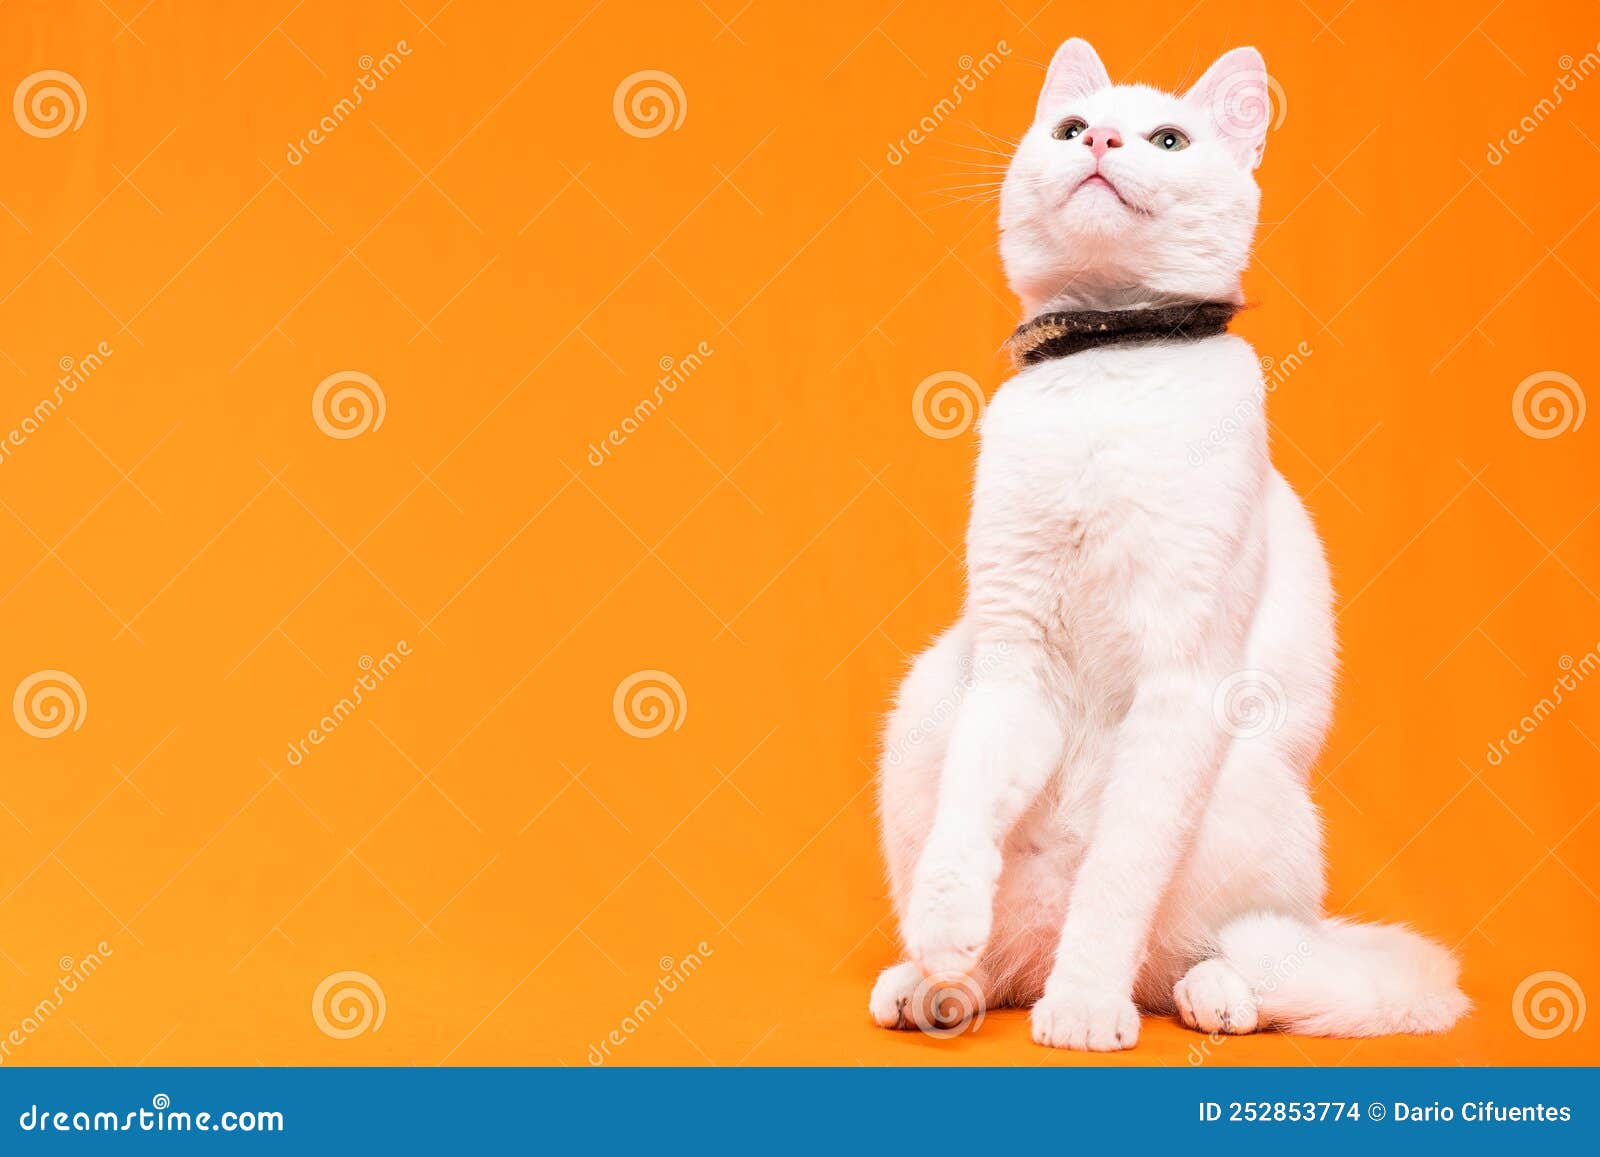 young white cat looking up on an orange background, text space